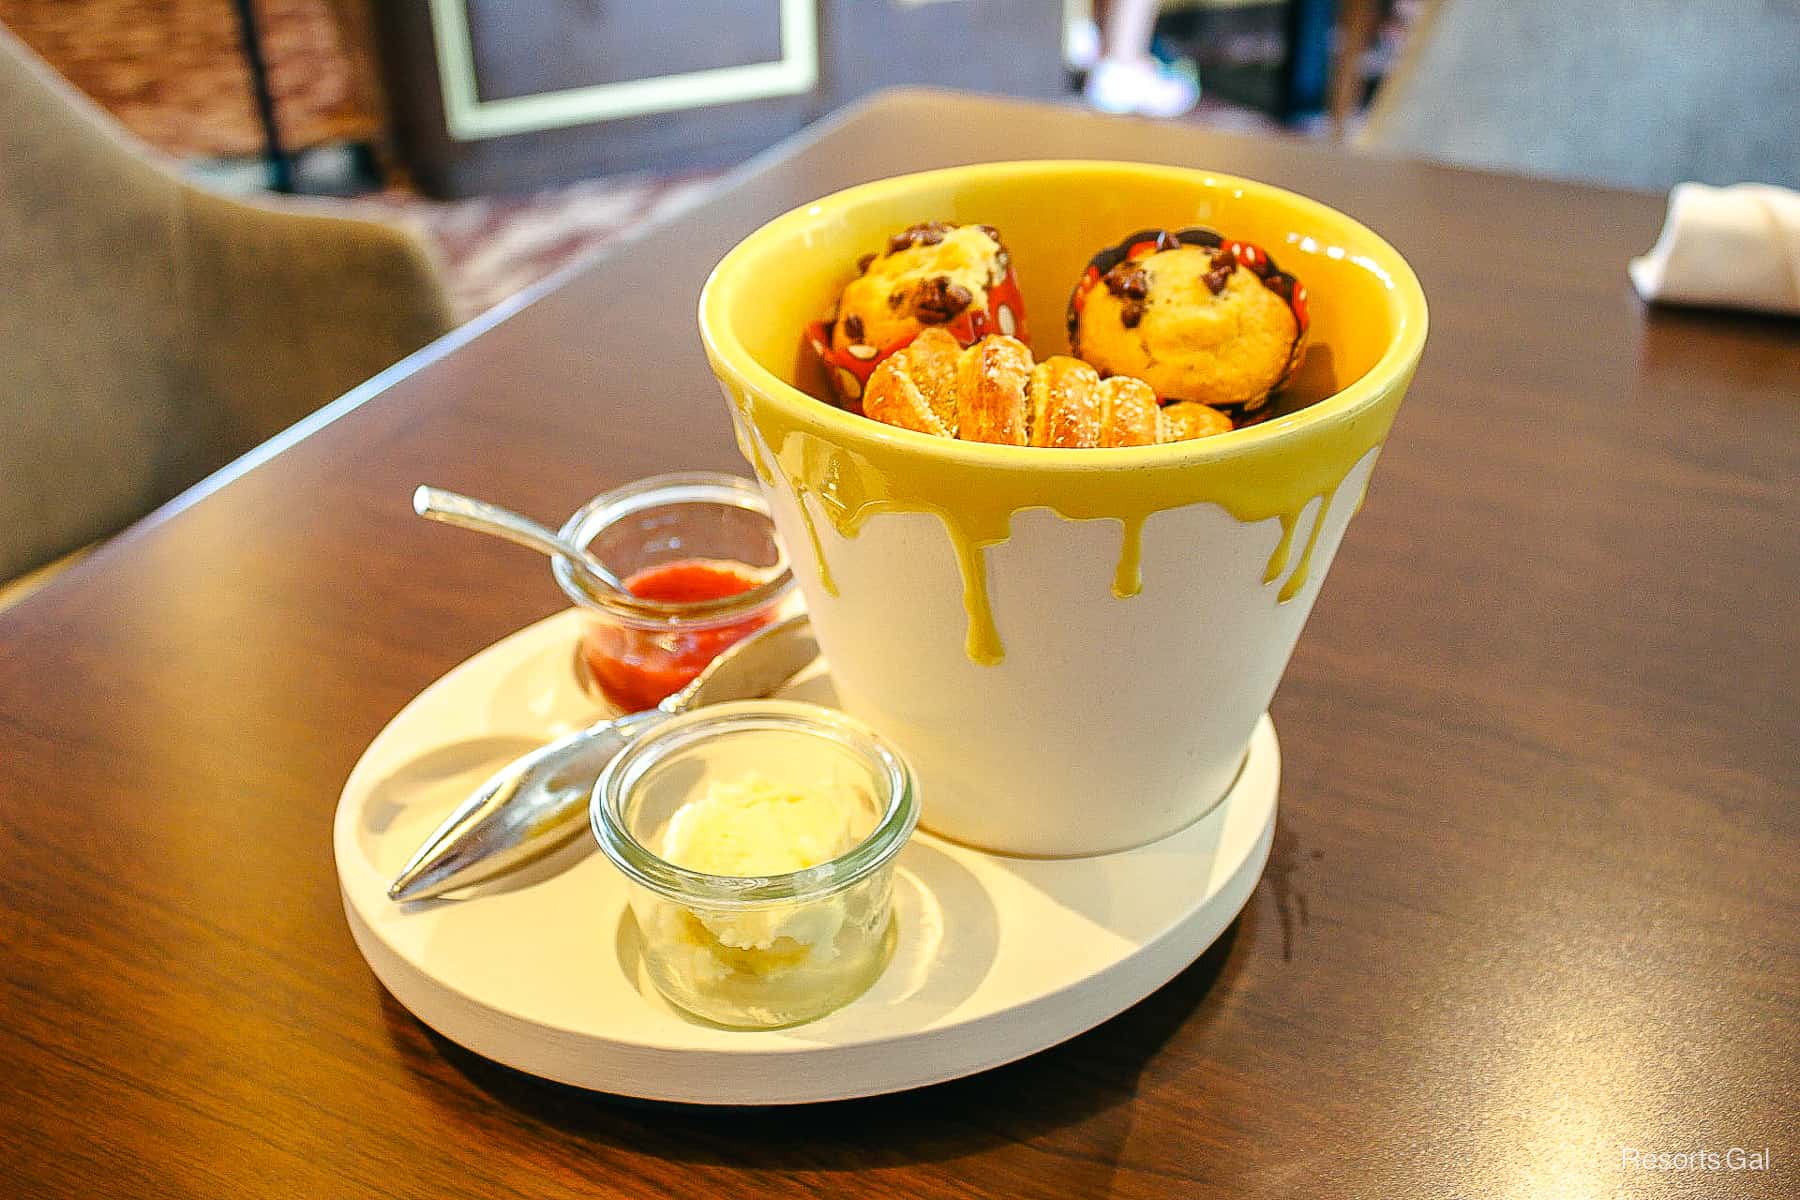 a bucket of pastries made to look like a paint bucket with yellow paint dripping down the sides 